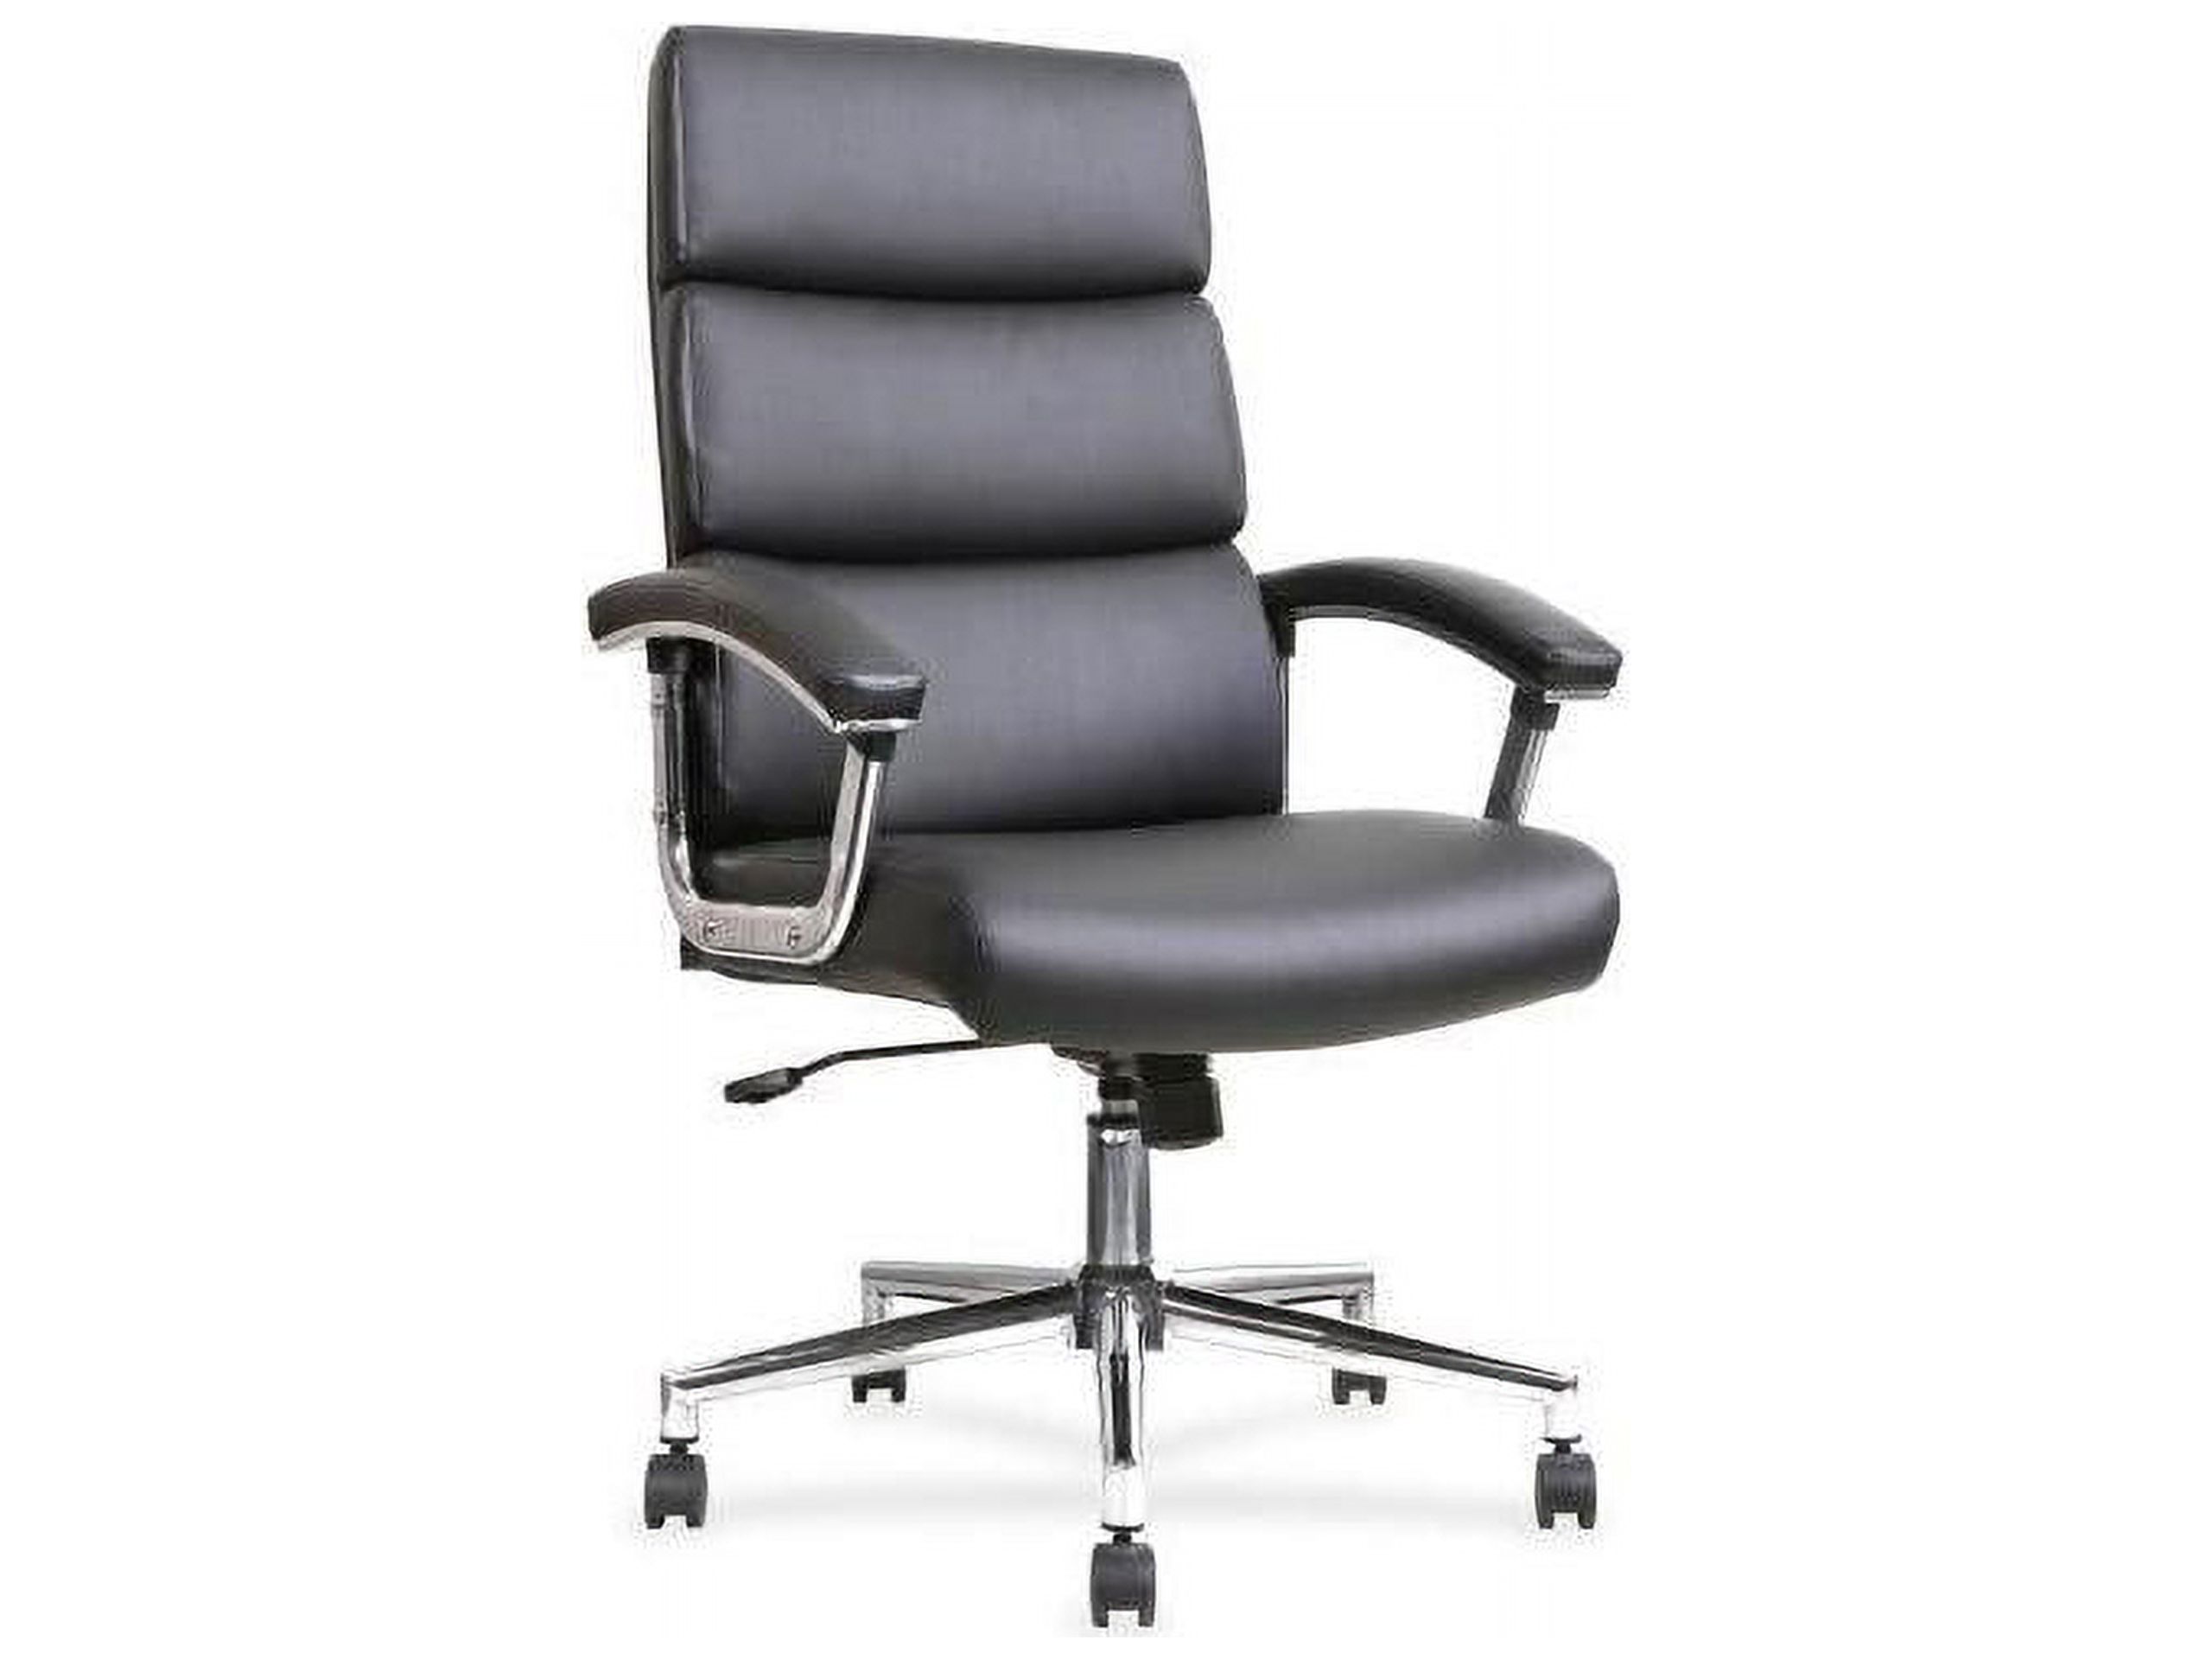 Lorell Leather High-back Chair Black Bonded Leather Seat - Black Back - Leather - 19.13" Seat Width x 18.88" Seat Depth - 1 Each - image 5 of 5